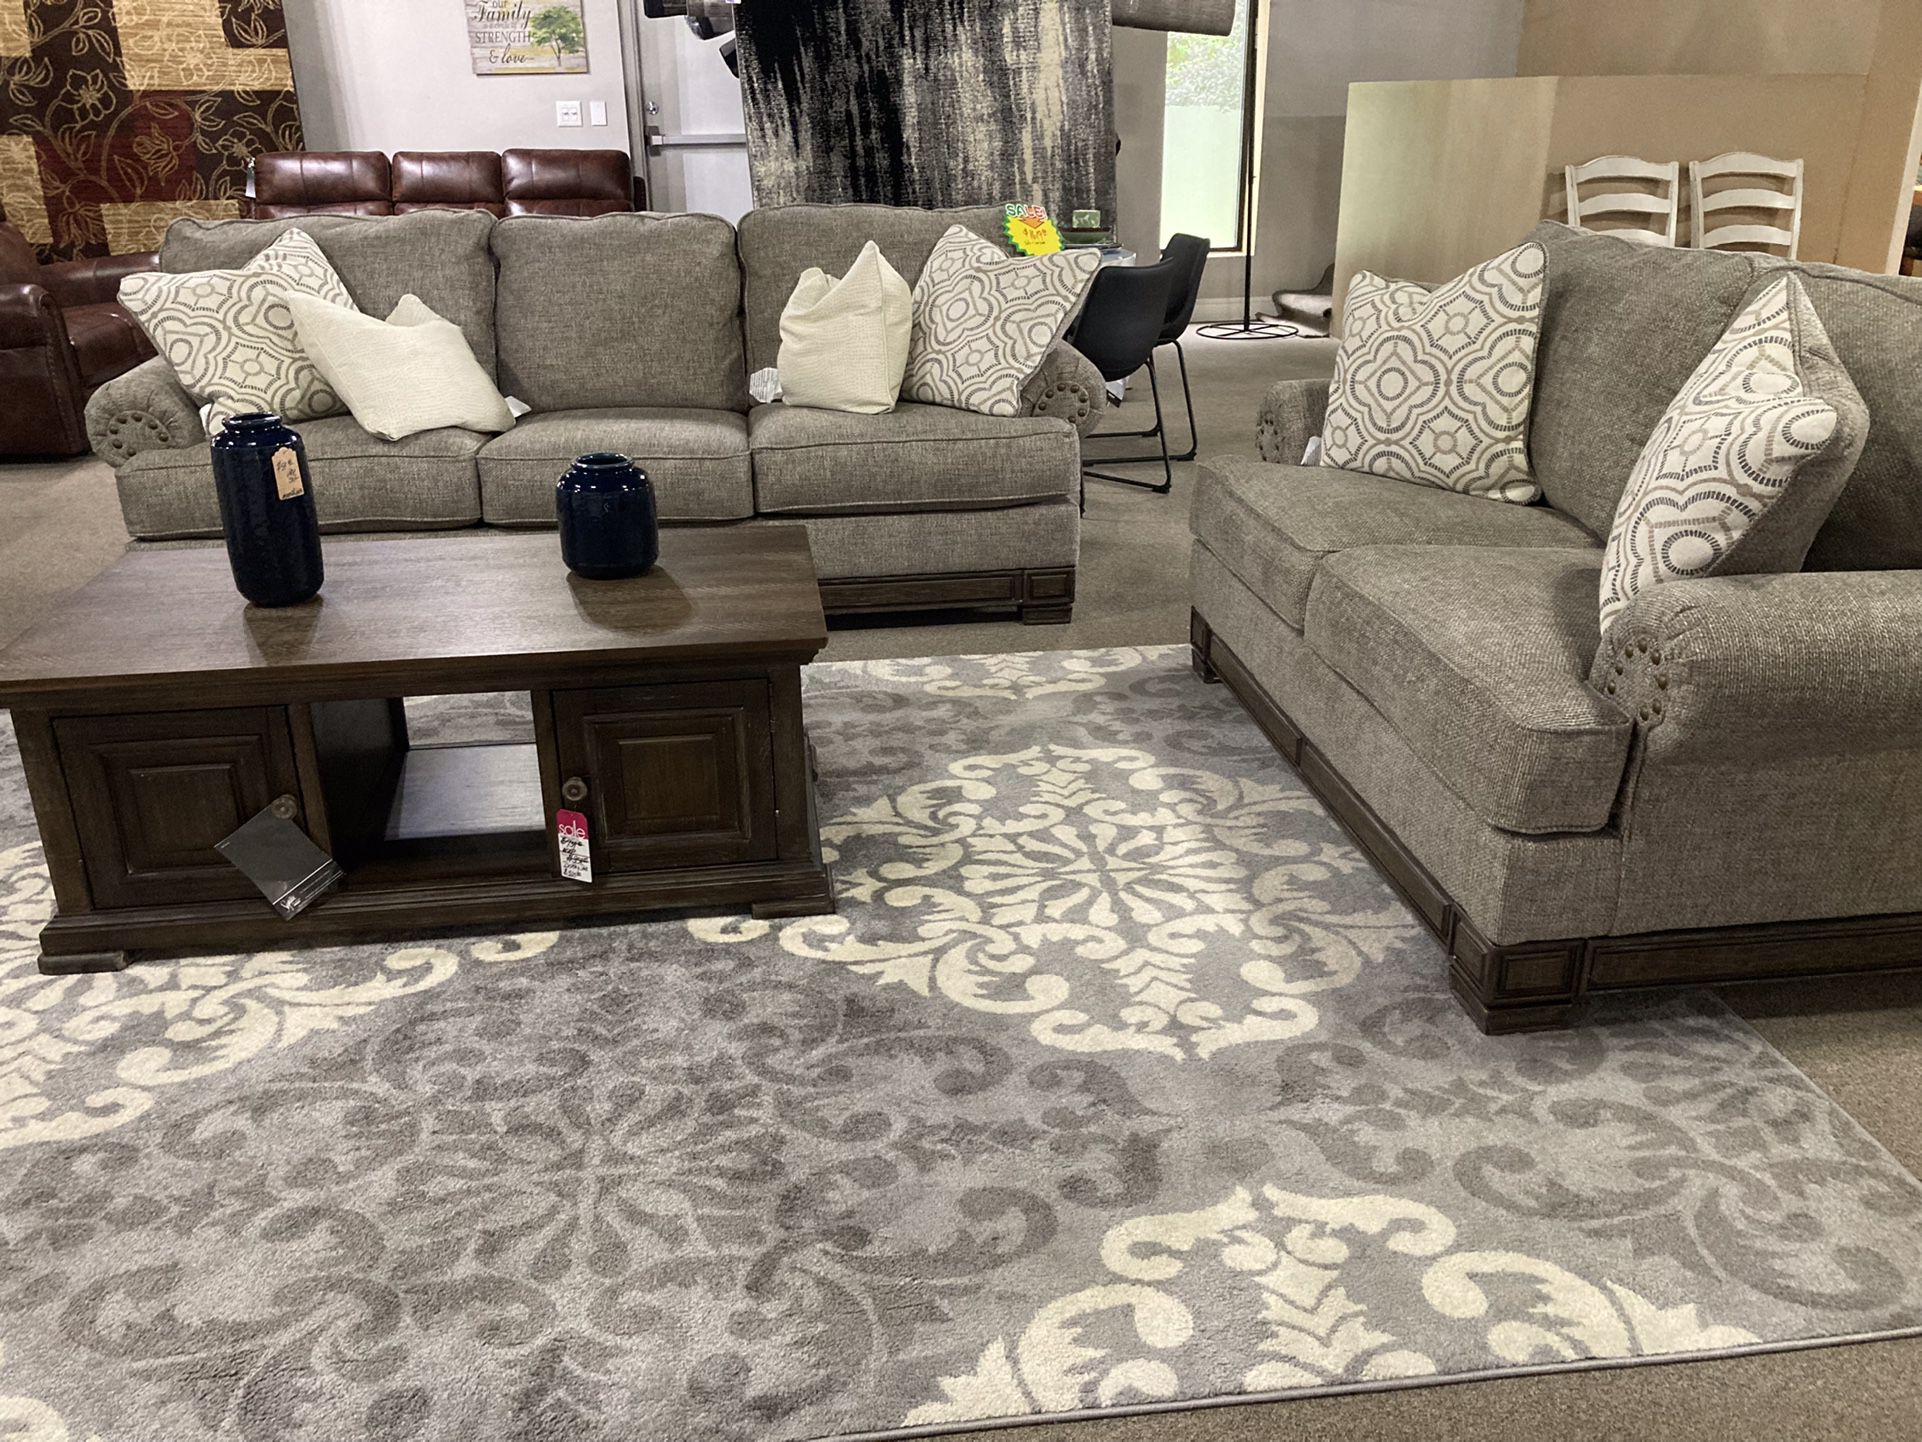 New Woodfront Sofa & Loveseat Includes Accent Pillows! We Deliver🚚